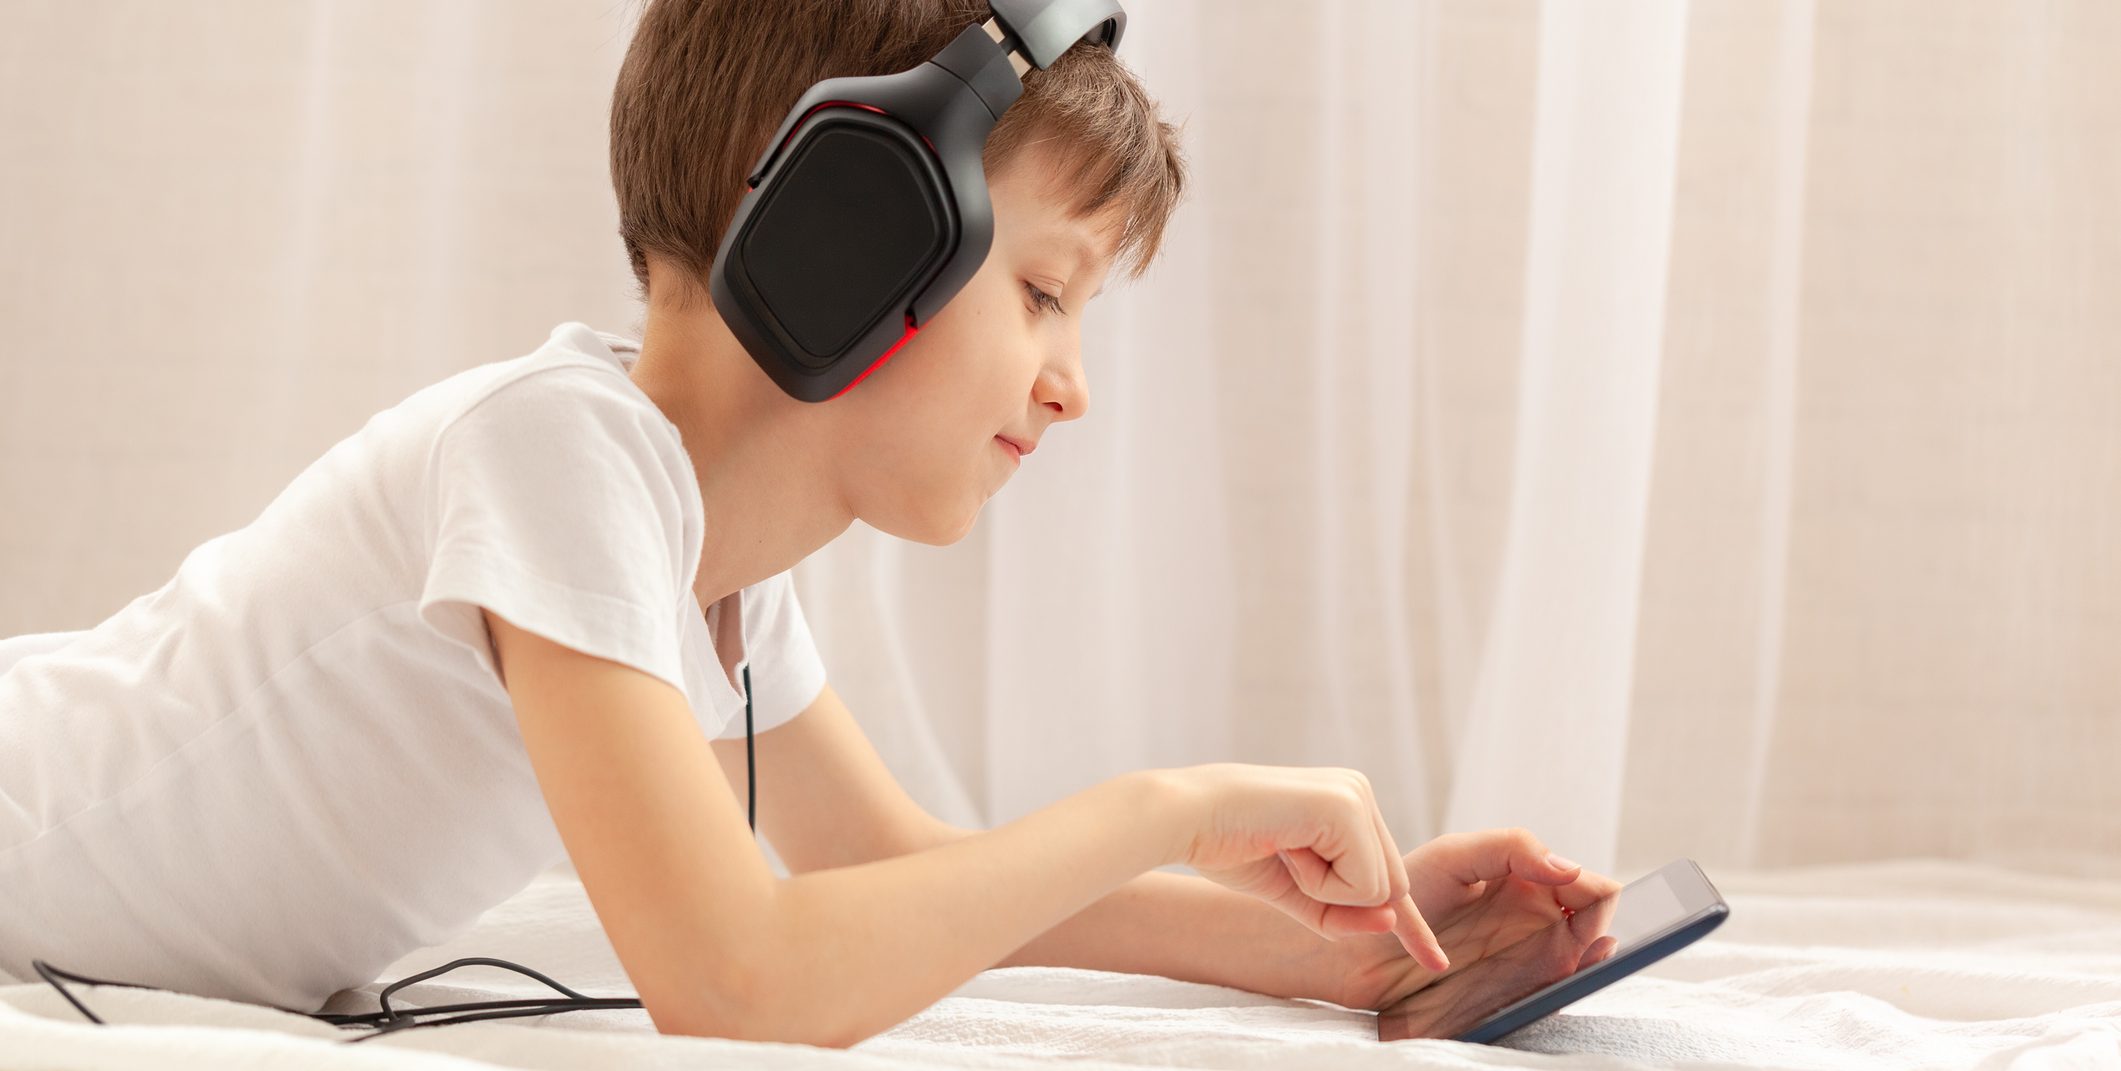 3 Ways to Get Your Kids to Put Down the Digital Devices